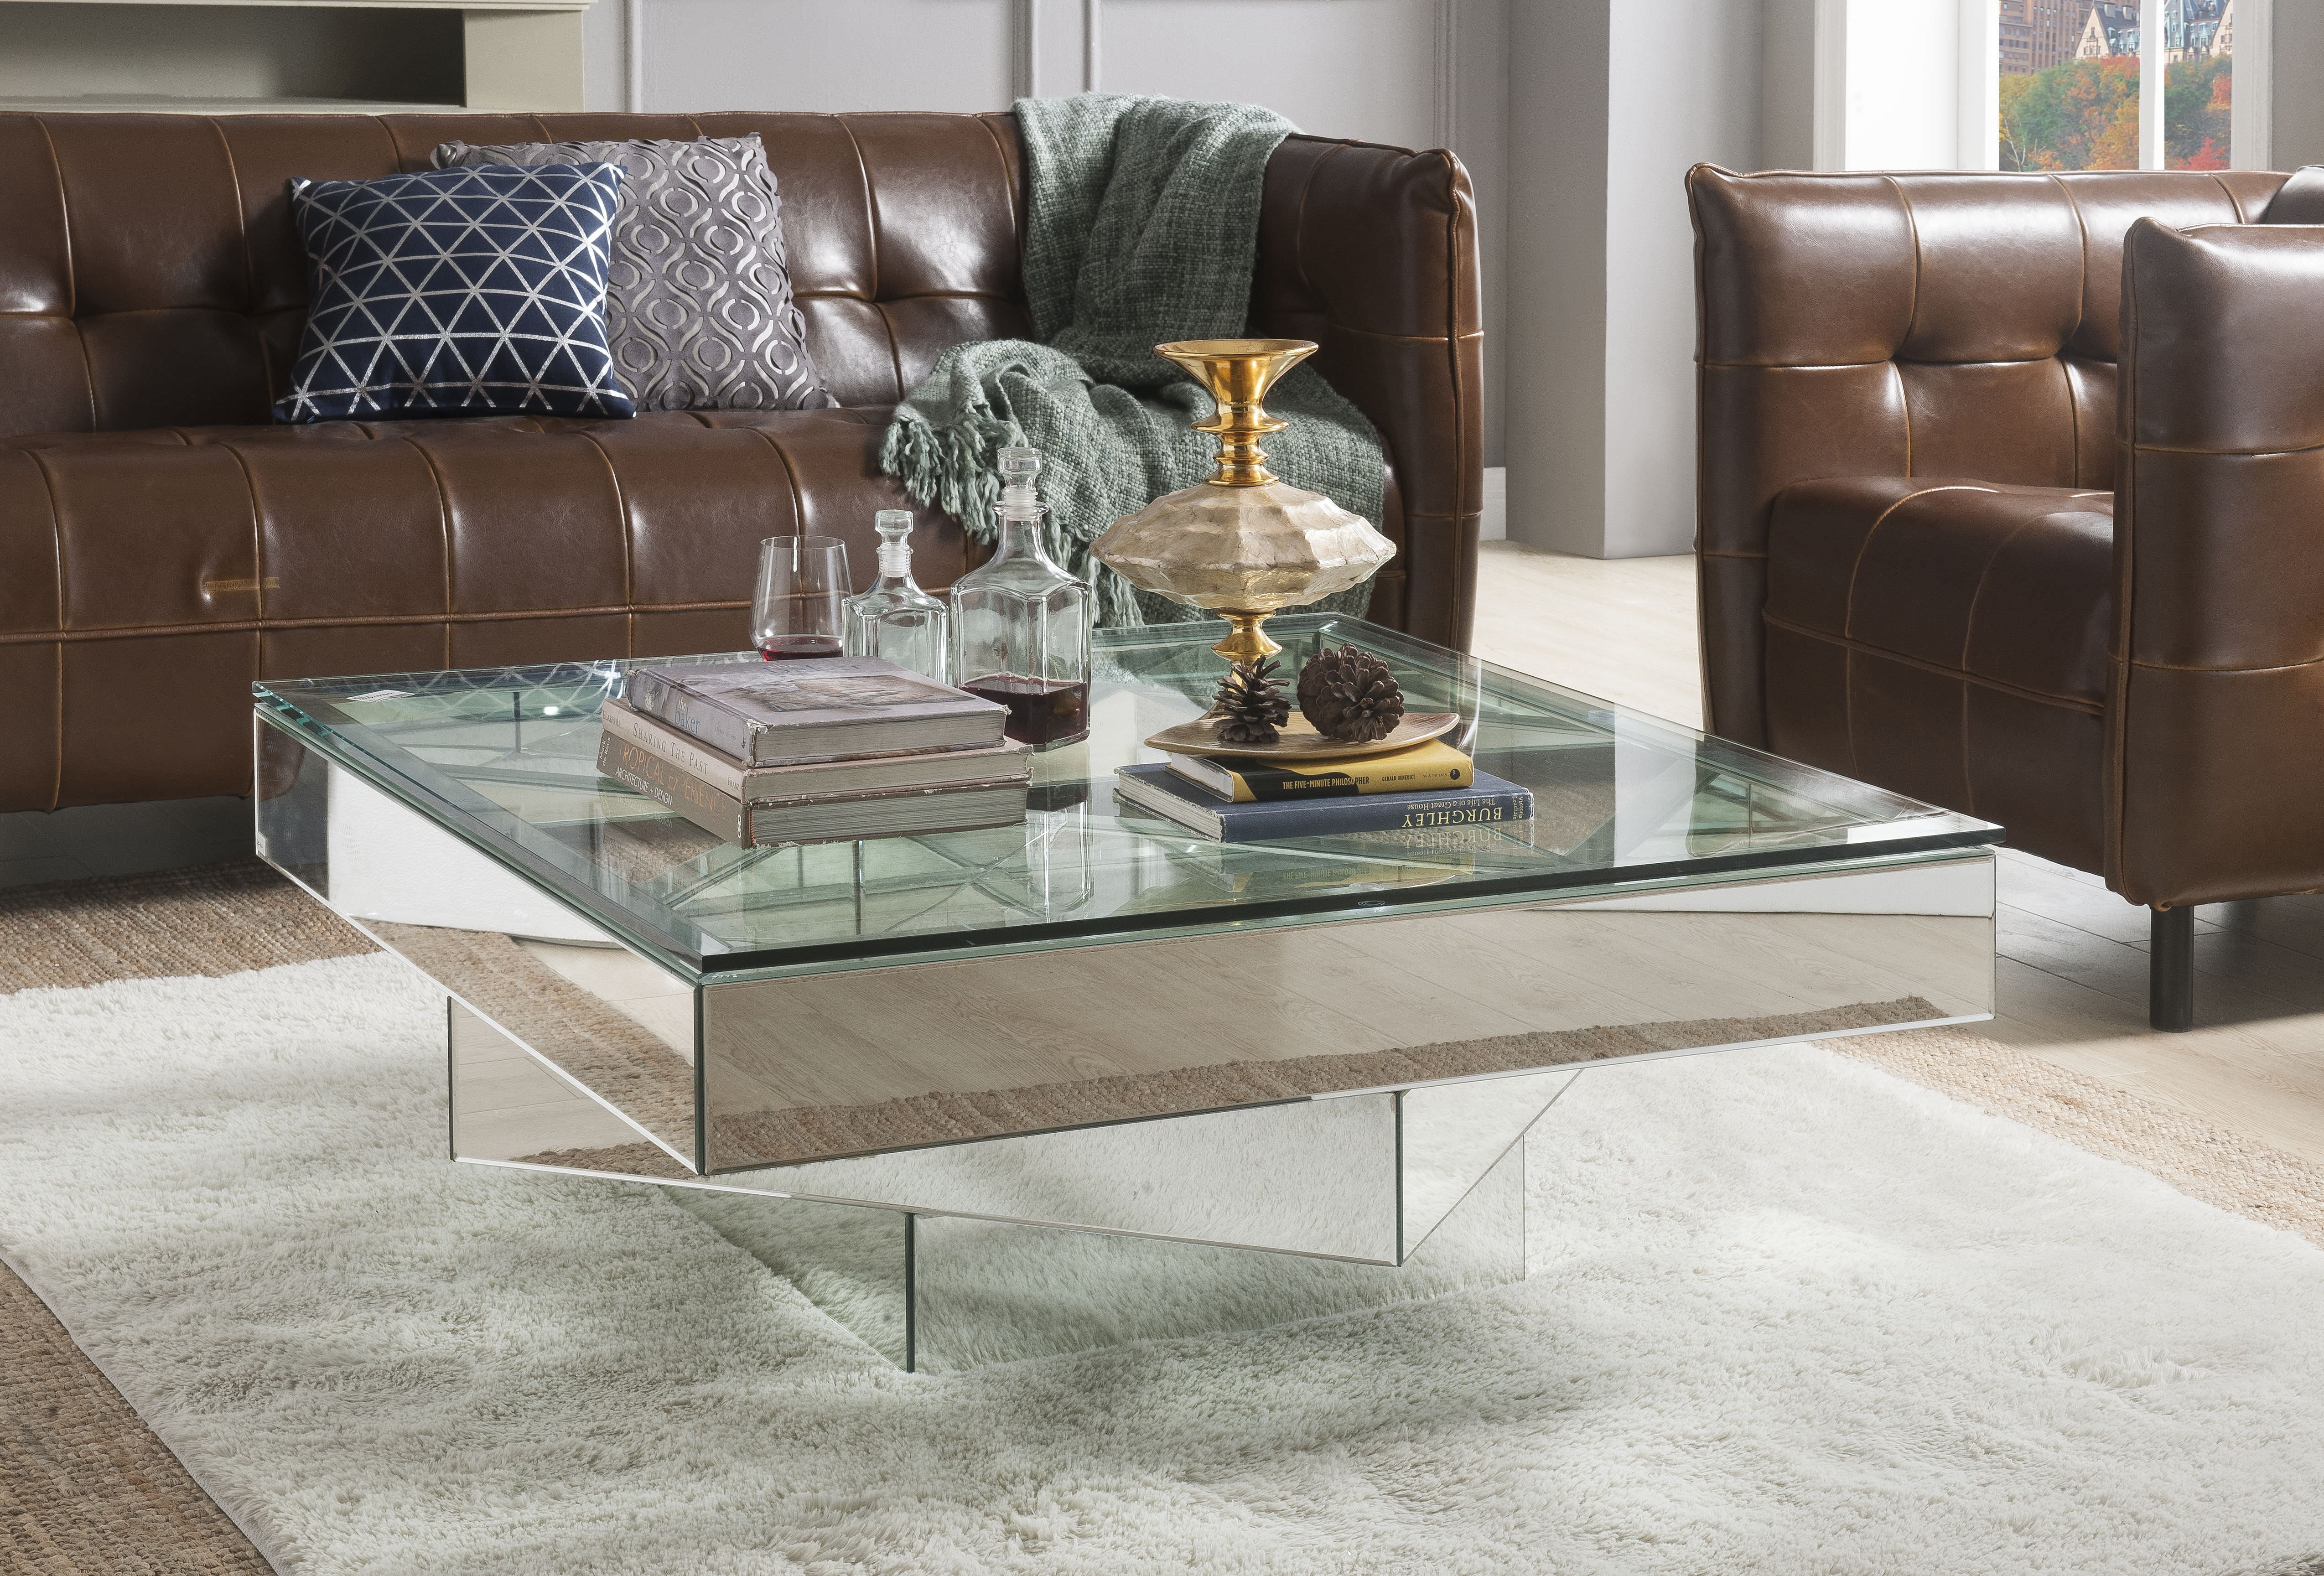 BetterBeds Meria Coffee Table - Mirrored - 15 x 40 x 40 in.